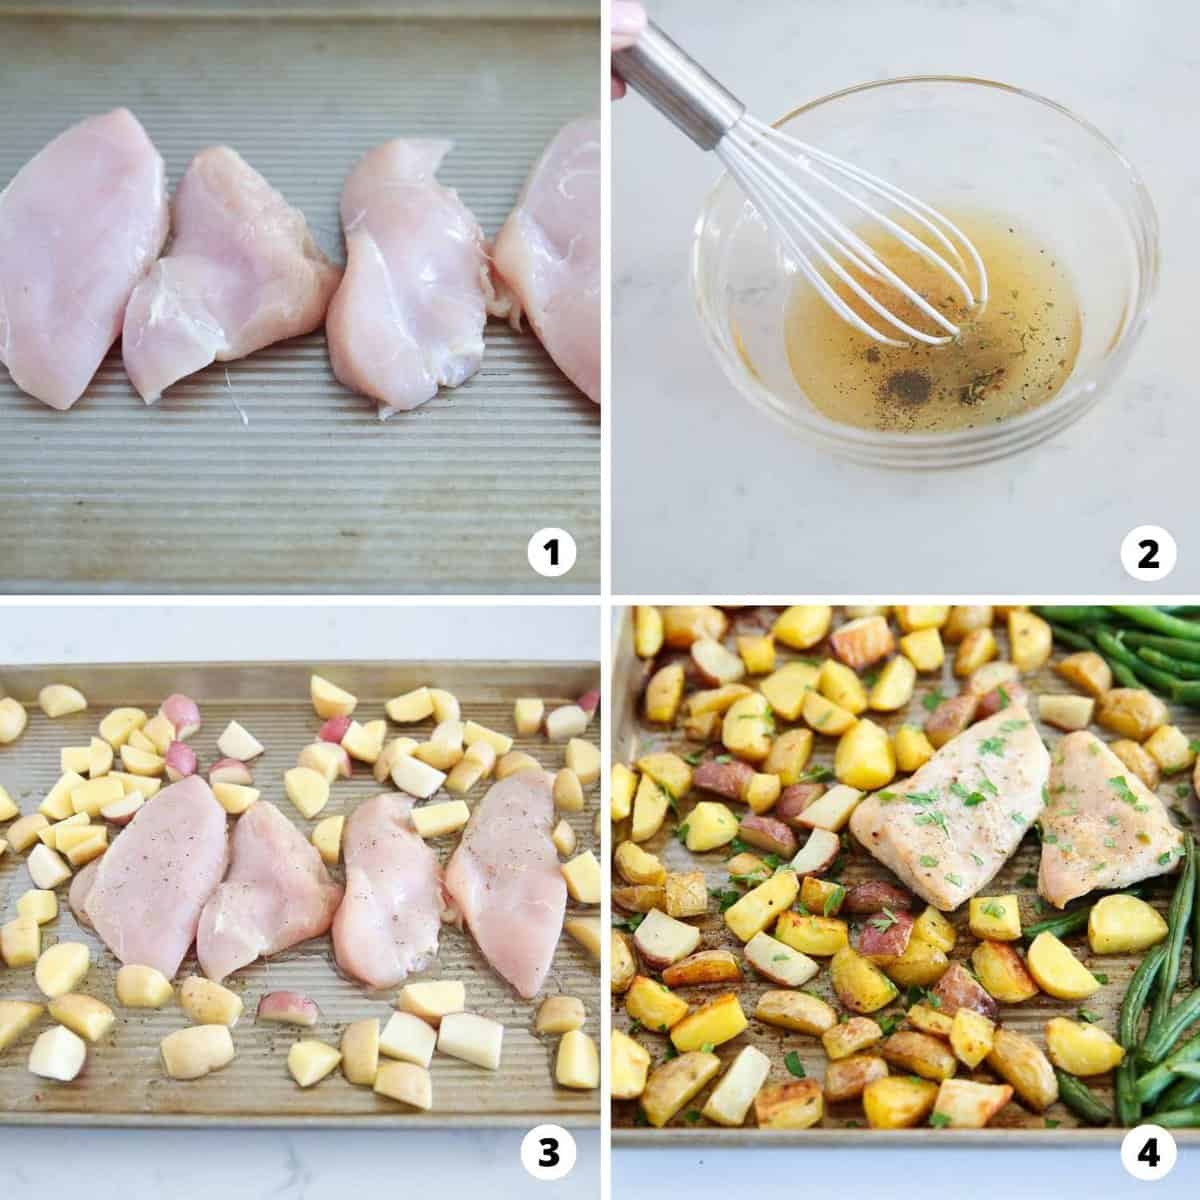 Step by step making chicken and potatoes.